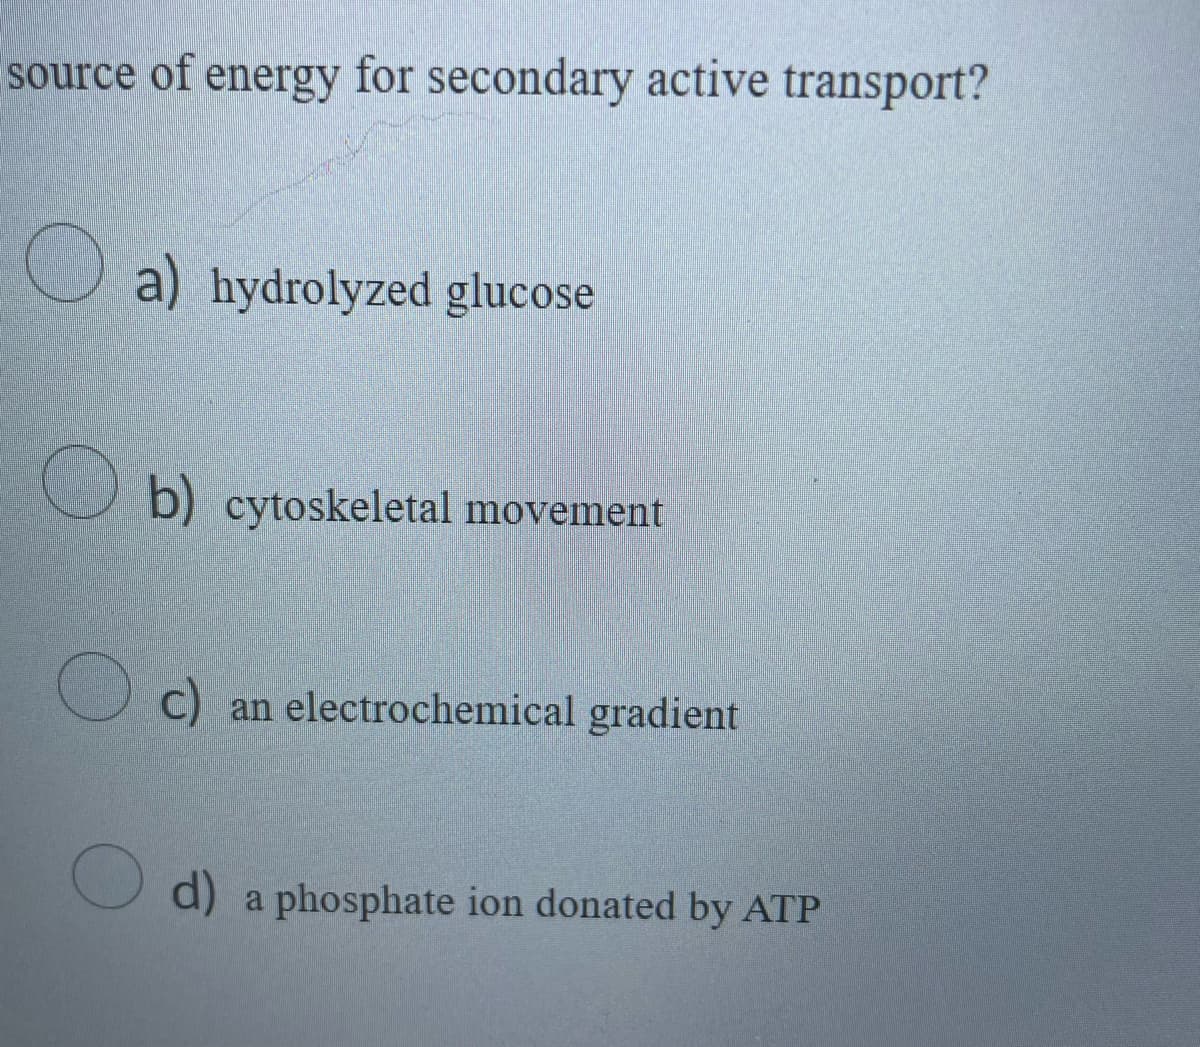 source of energy for secondary active transport?
O a) hydrolyzed glucose
b) cytoskeletal movement
O c) an electrochemical gradient
O d) a phosphate ion donated by ATP
